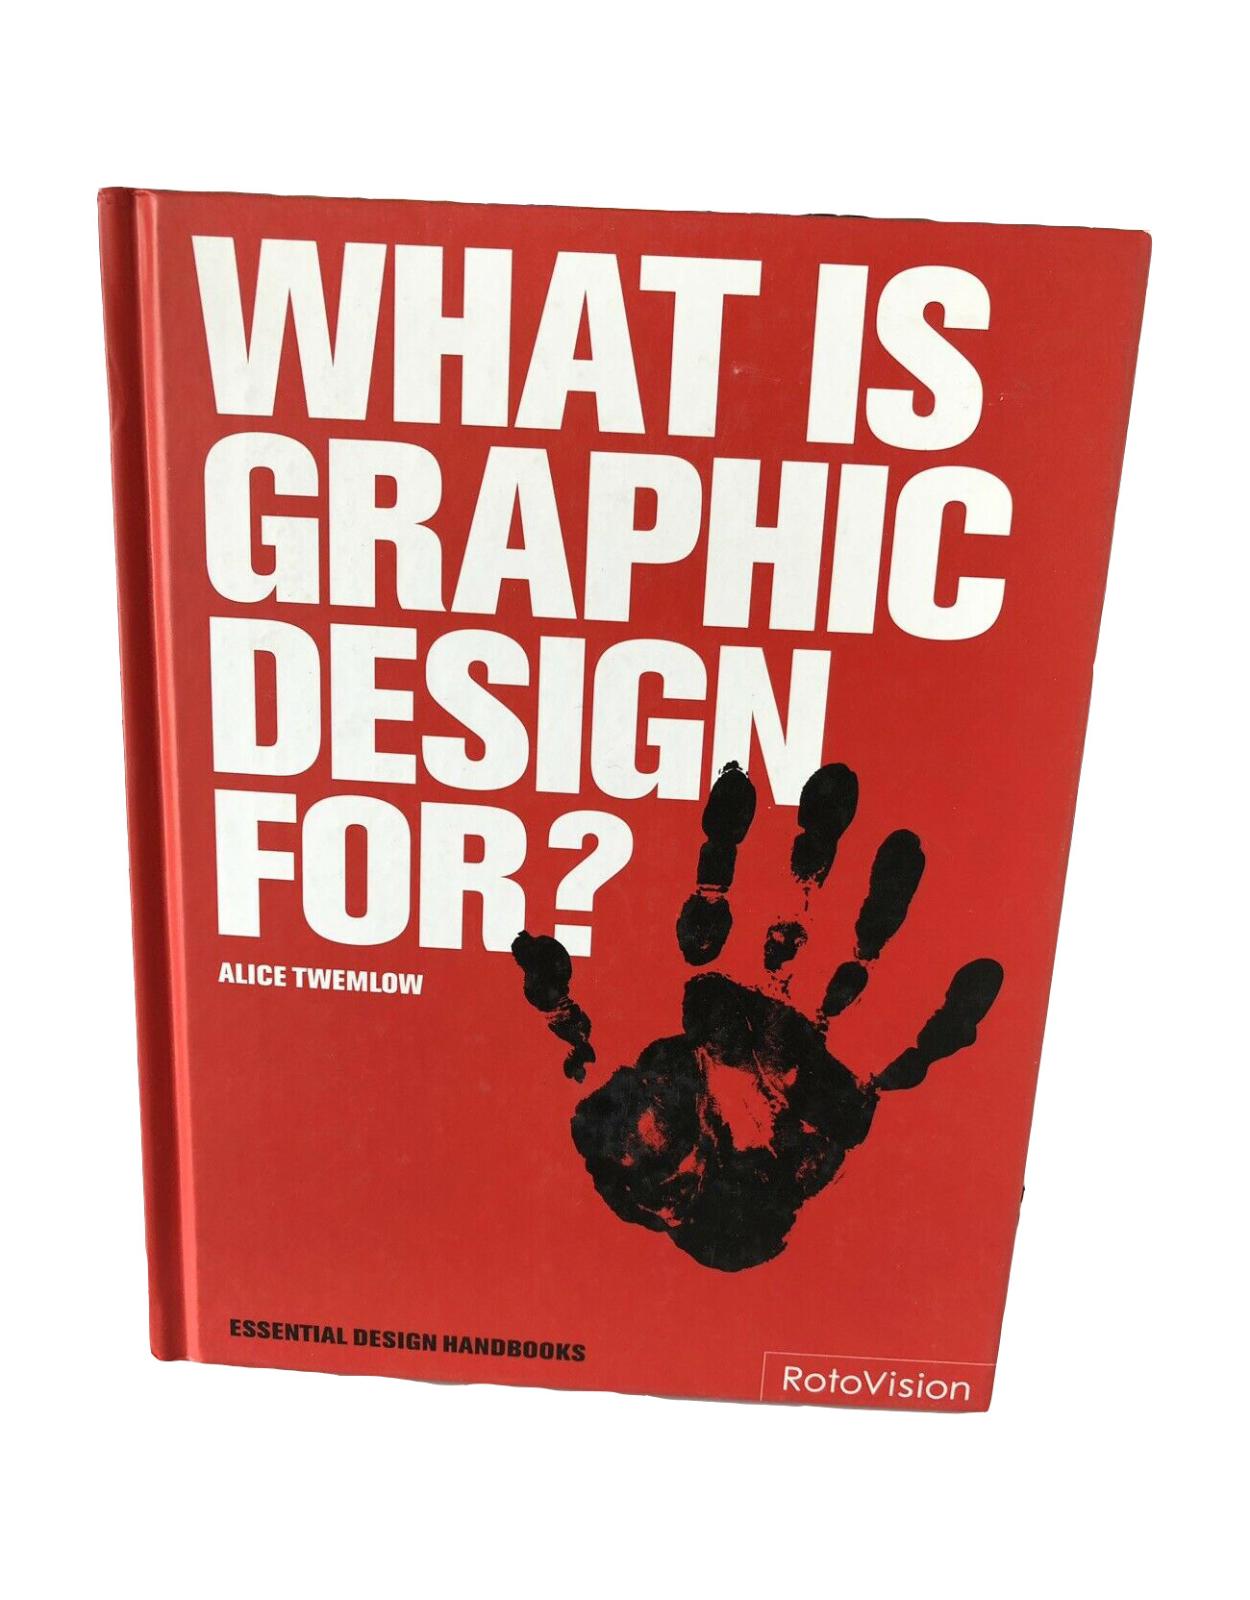 What is Graphic Design For ?